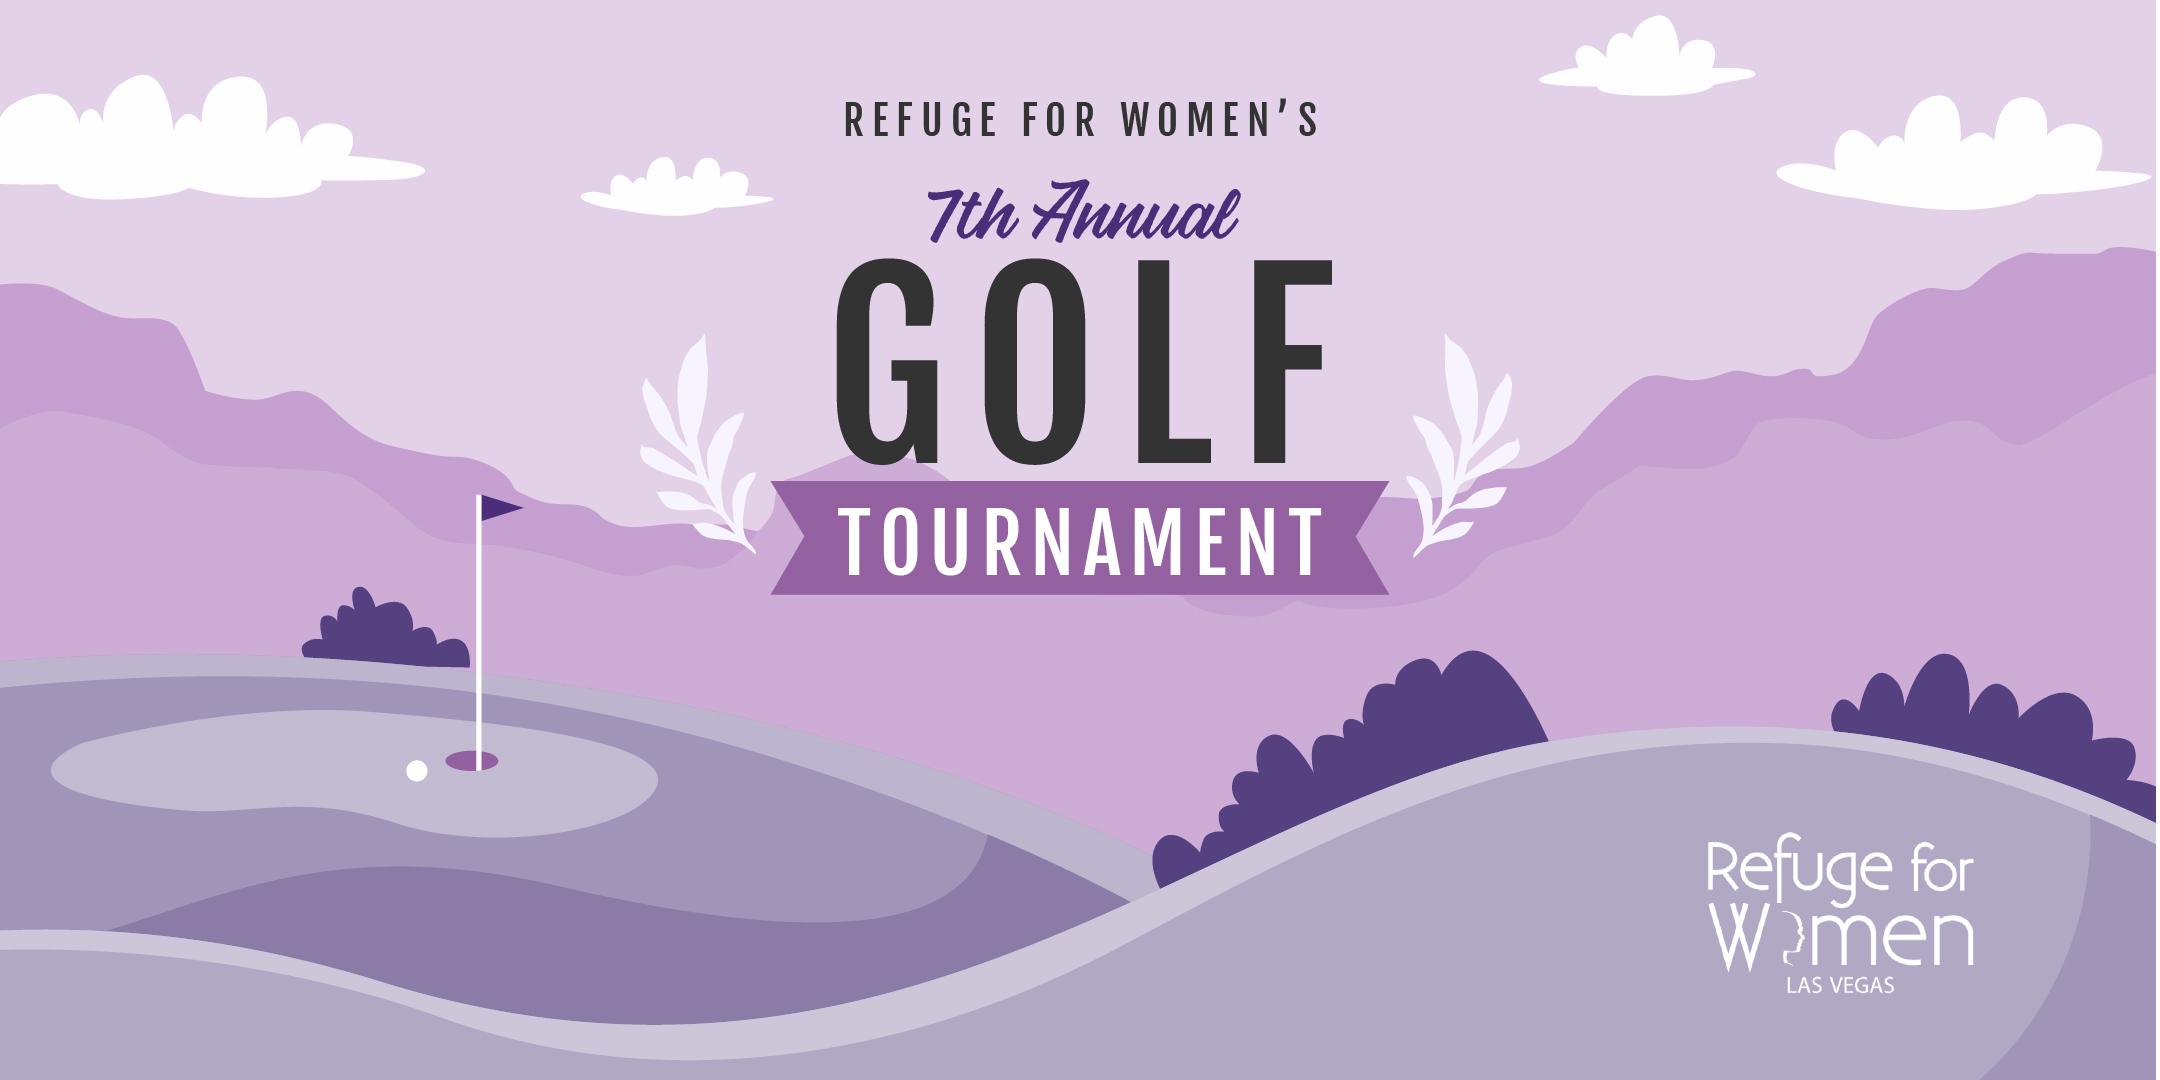 7th Annual Golf Tournament for Refuge For Women